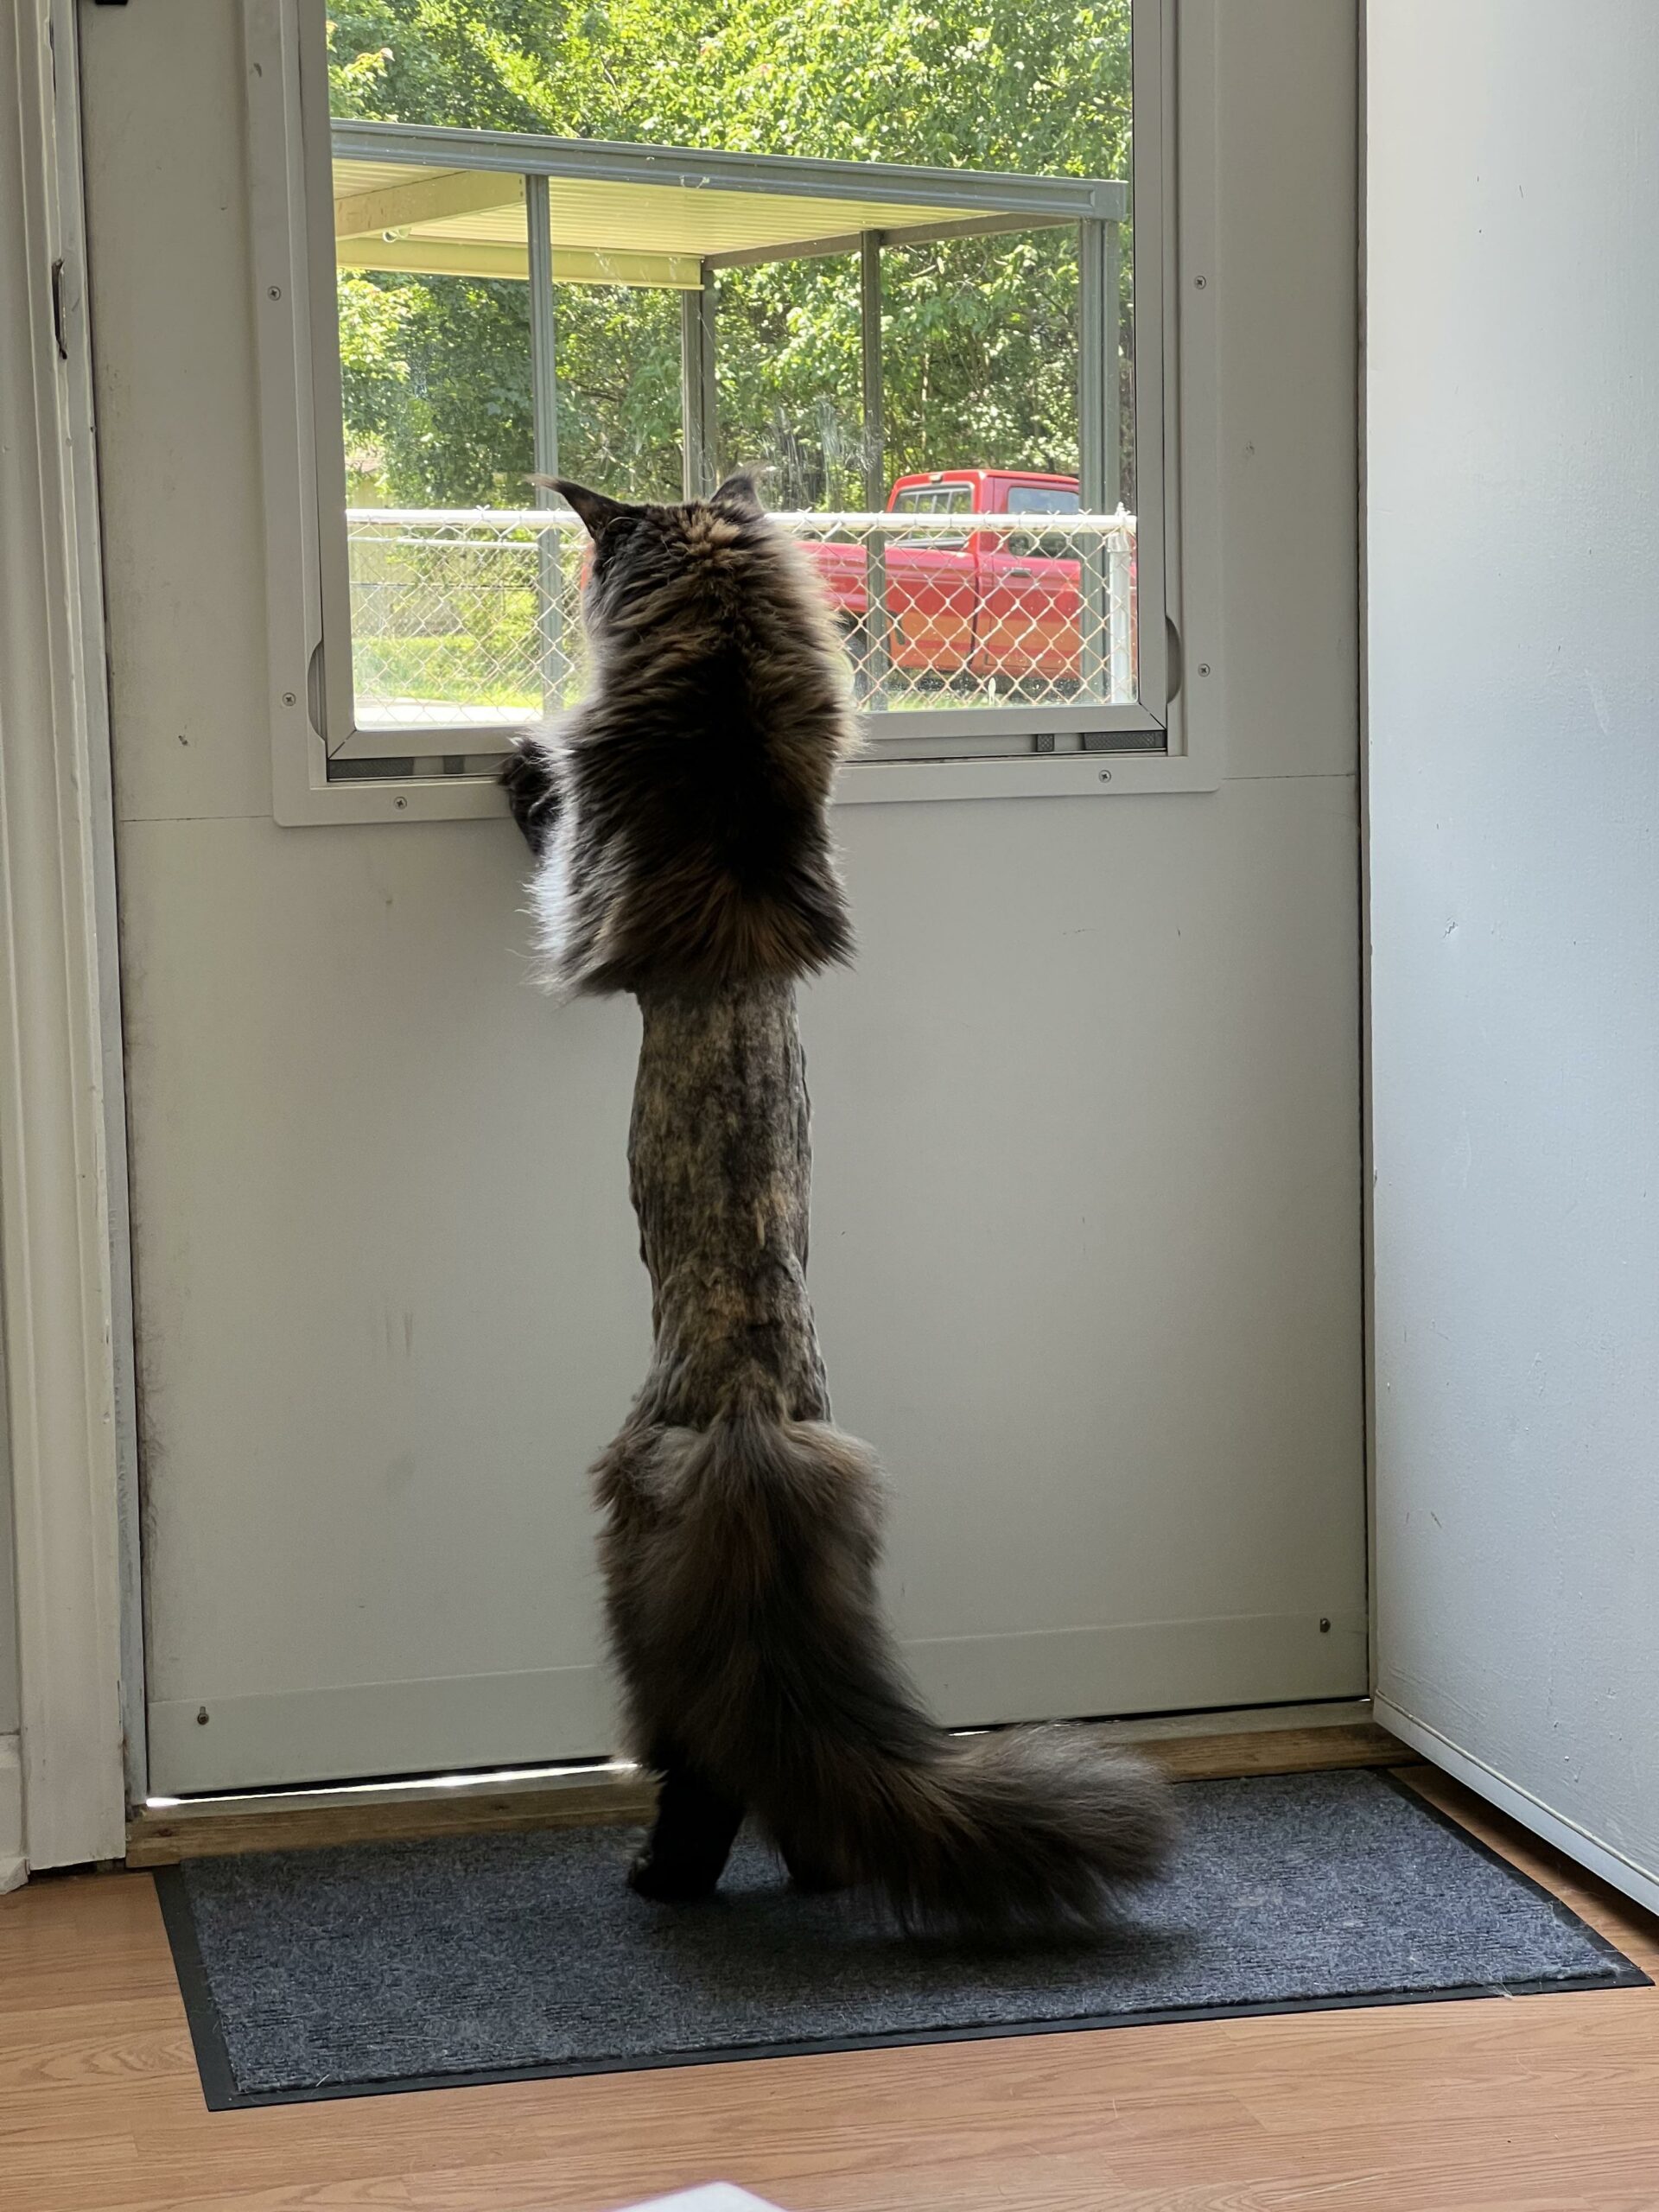 cat looking out the window. His middle has been shaved, so he looks fluffy on top and bottom but skinny in the middle.